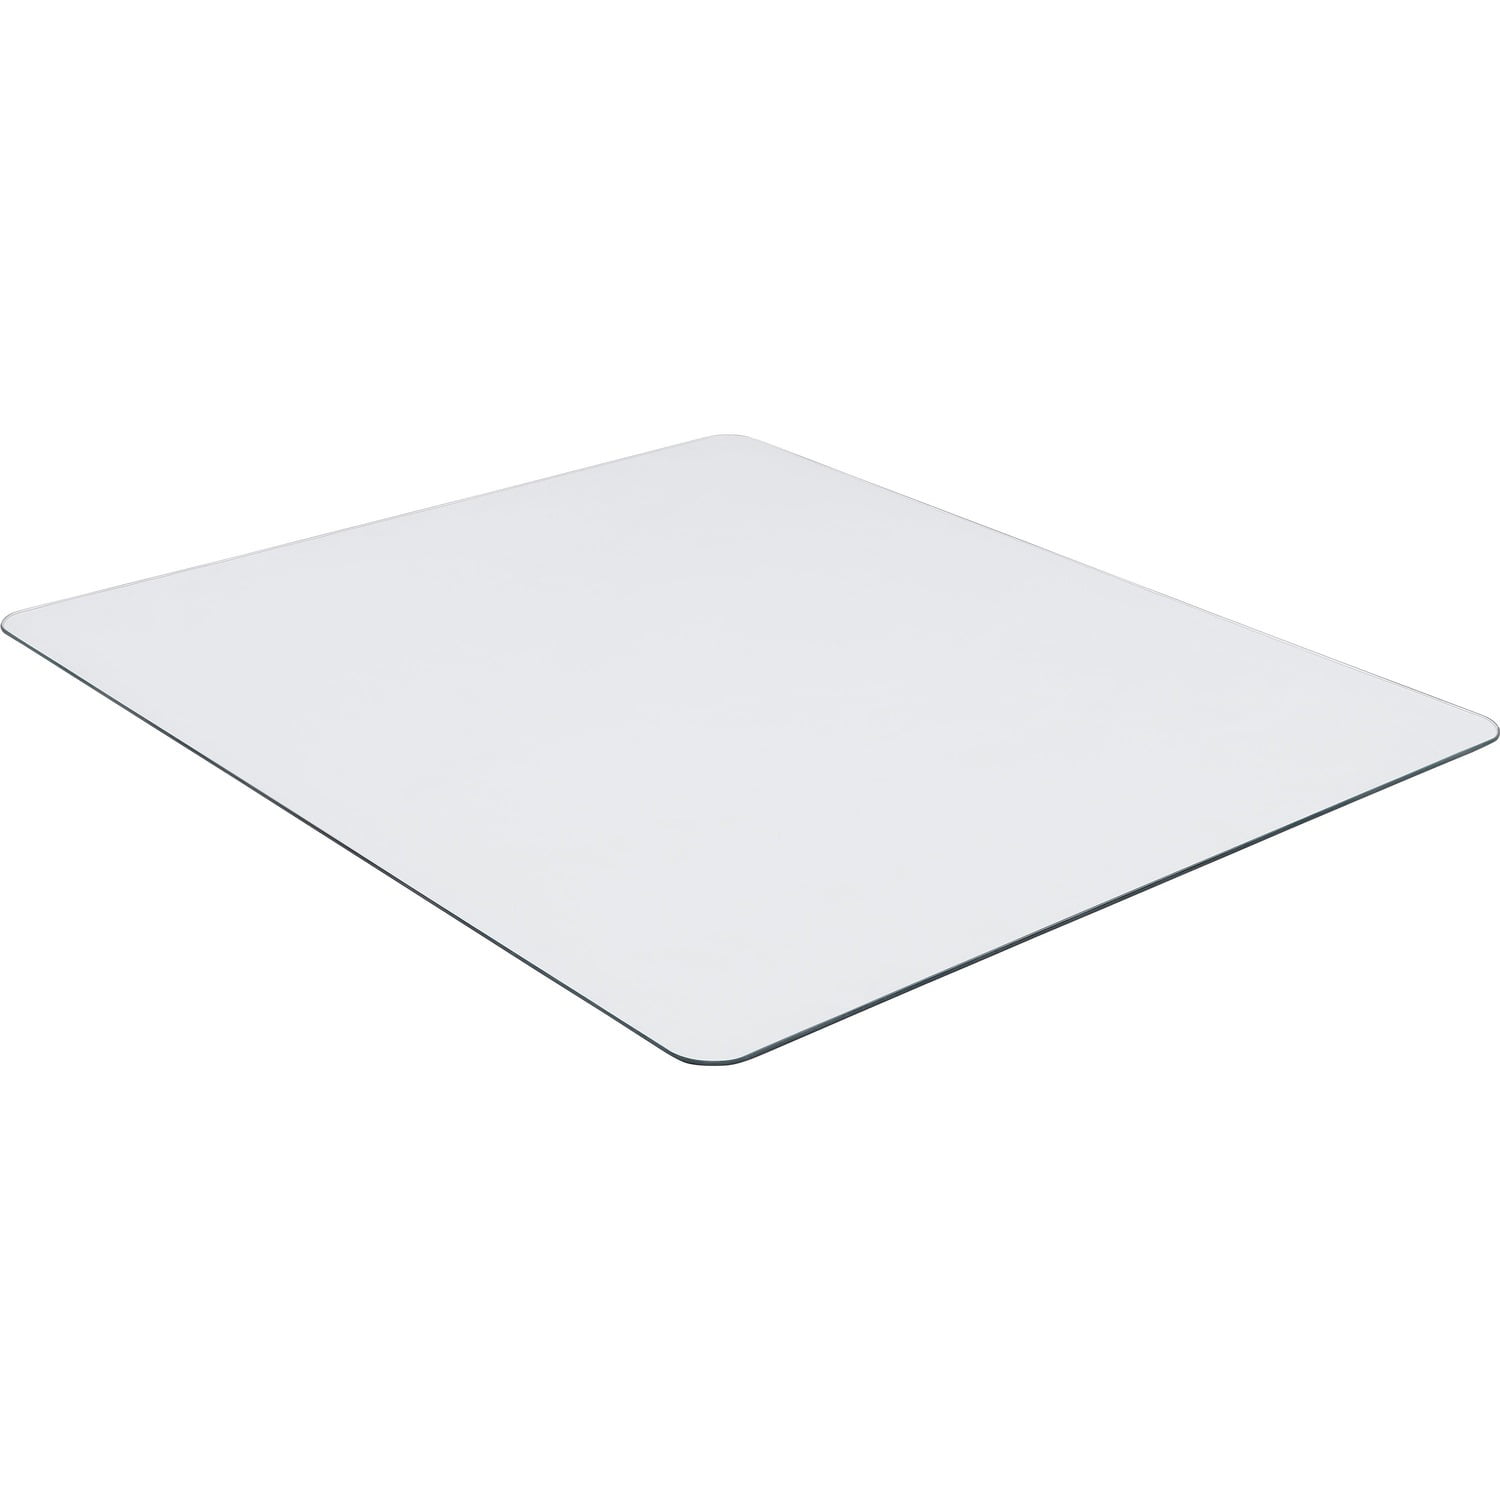 Tempered Glass Chair Mat 36 x 46 Scratch Resistant Any Type Flooring Chairmat 